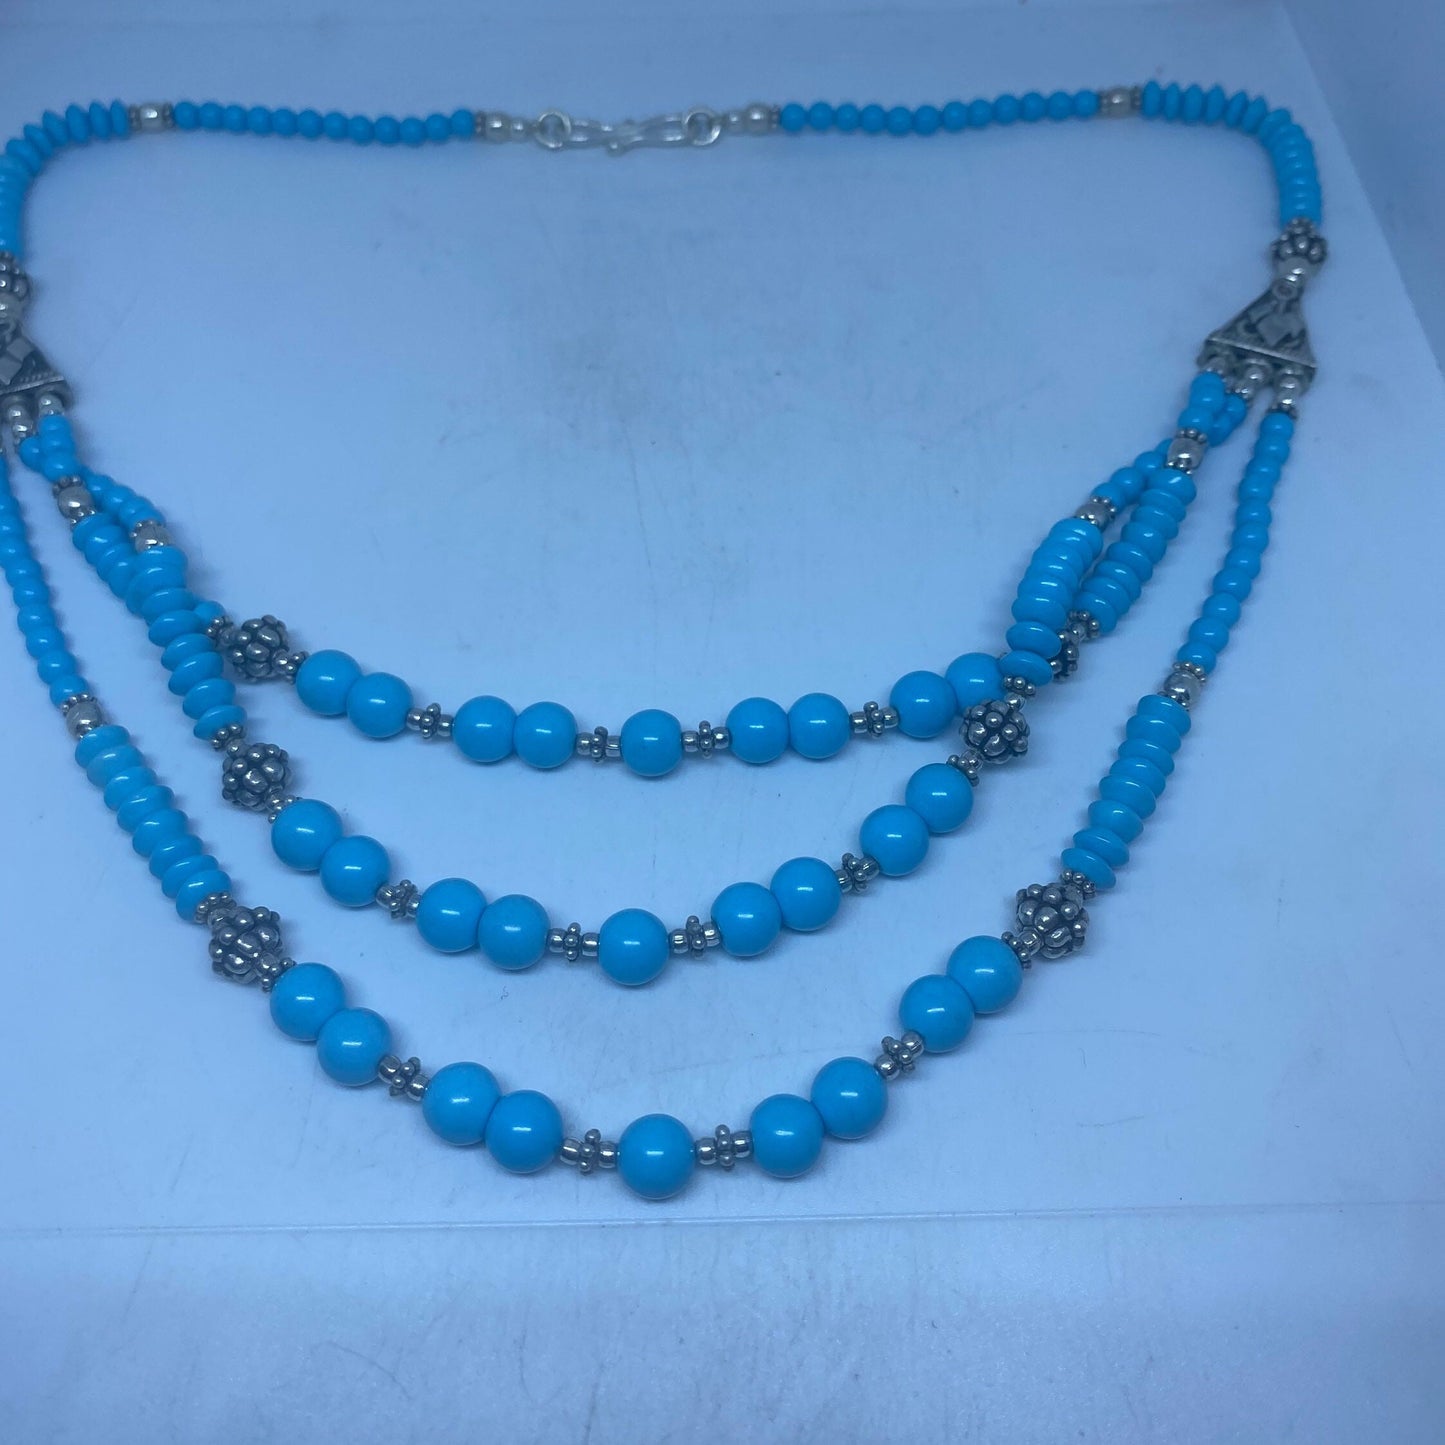 Vintage Moroccan Turquoise Necklace with 925 Sterling Silver